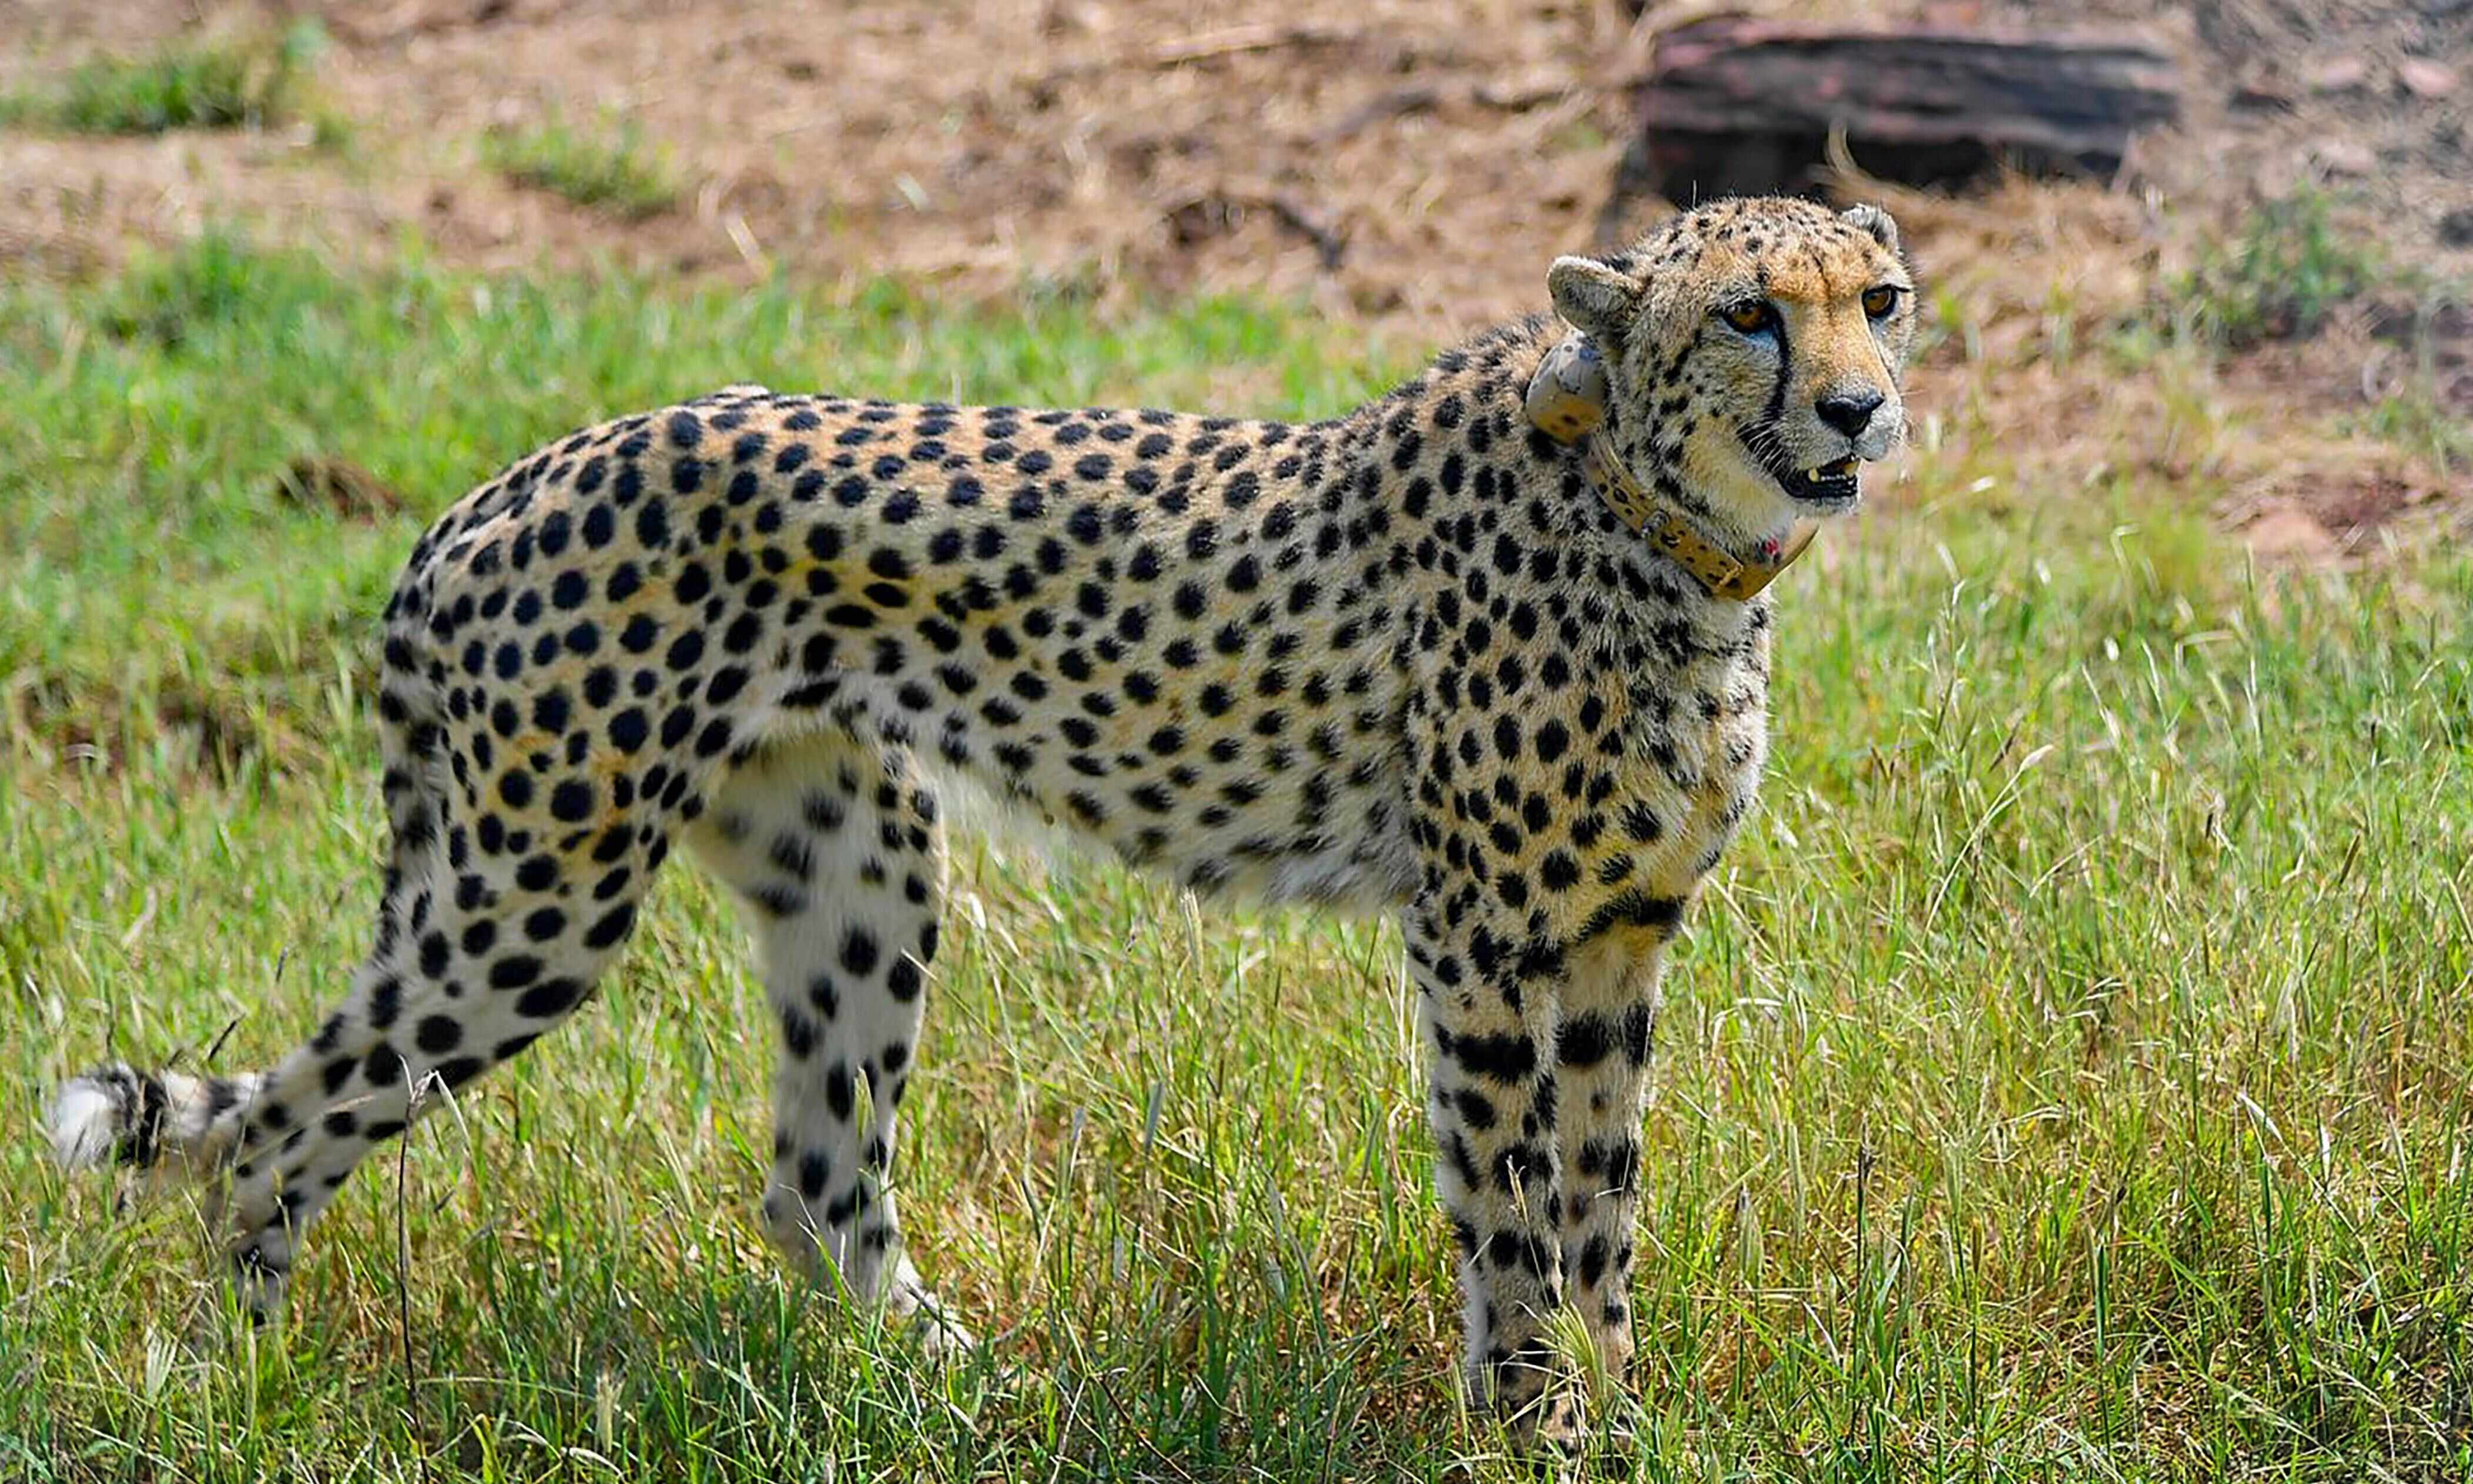 Cheetahs at KNP: Villagers fear land acquisition, human-animal conflict